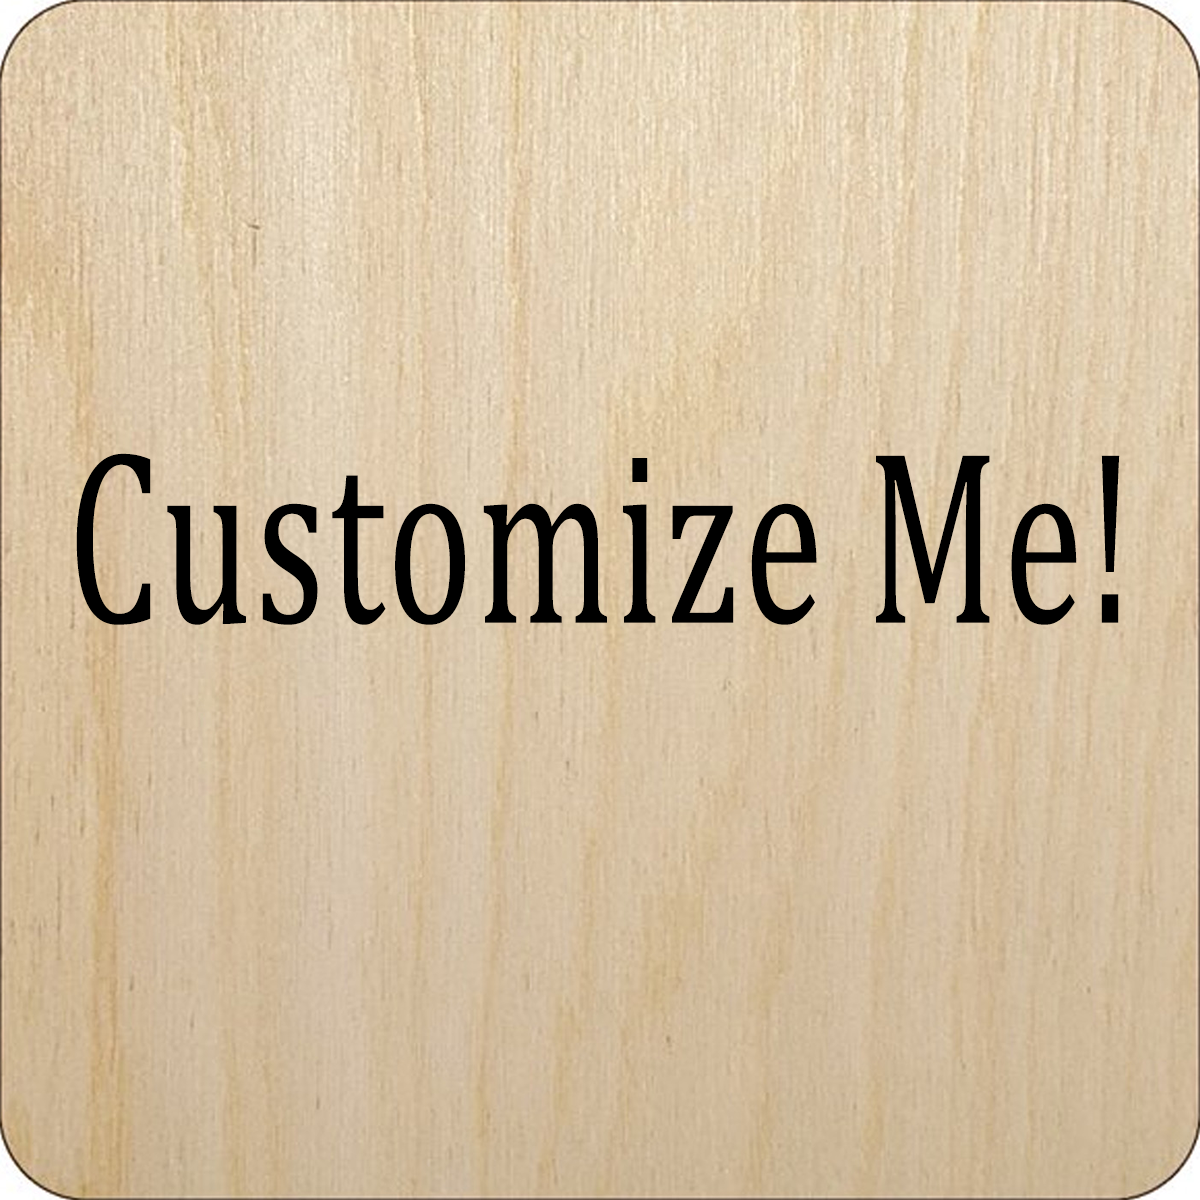 Custom Thick Wooden Coasters Set of 4